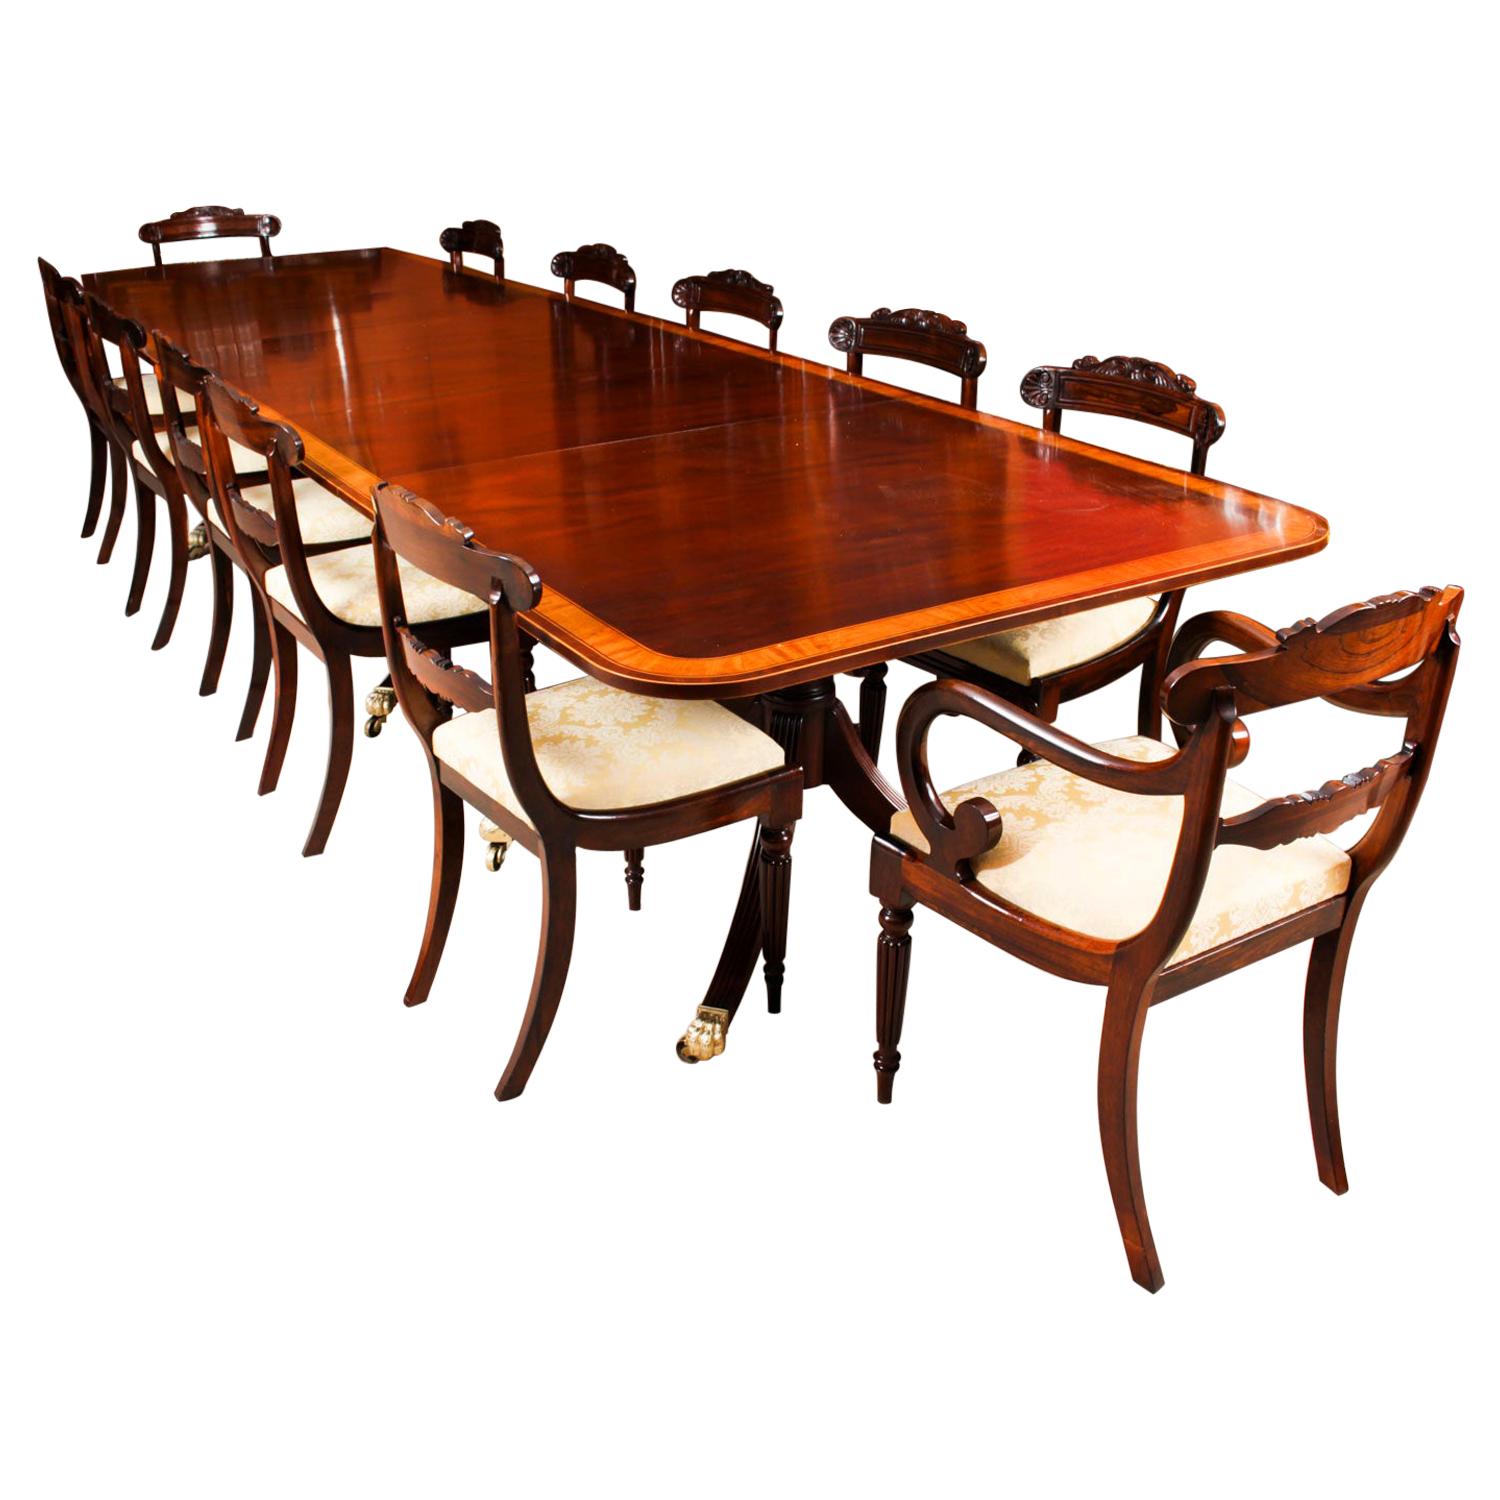 Antique Regency Metamorphic Dining Table and 12 Chairs, 19th Century